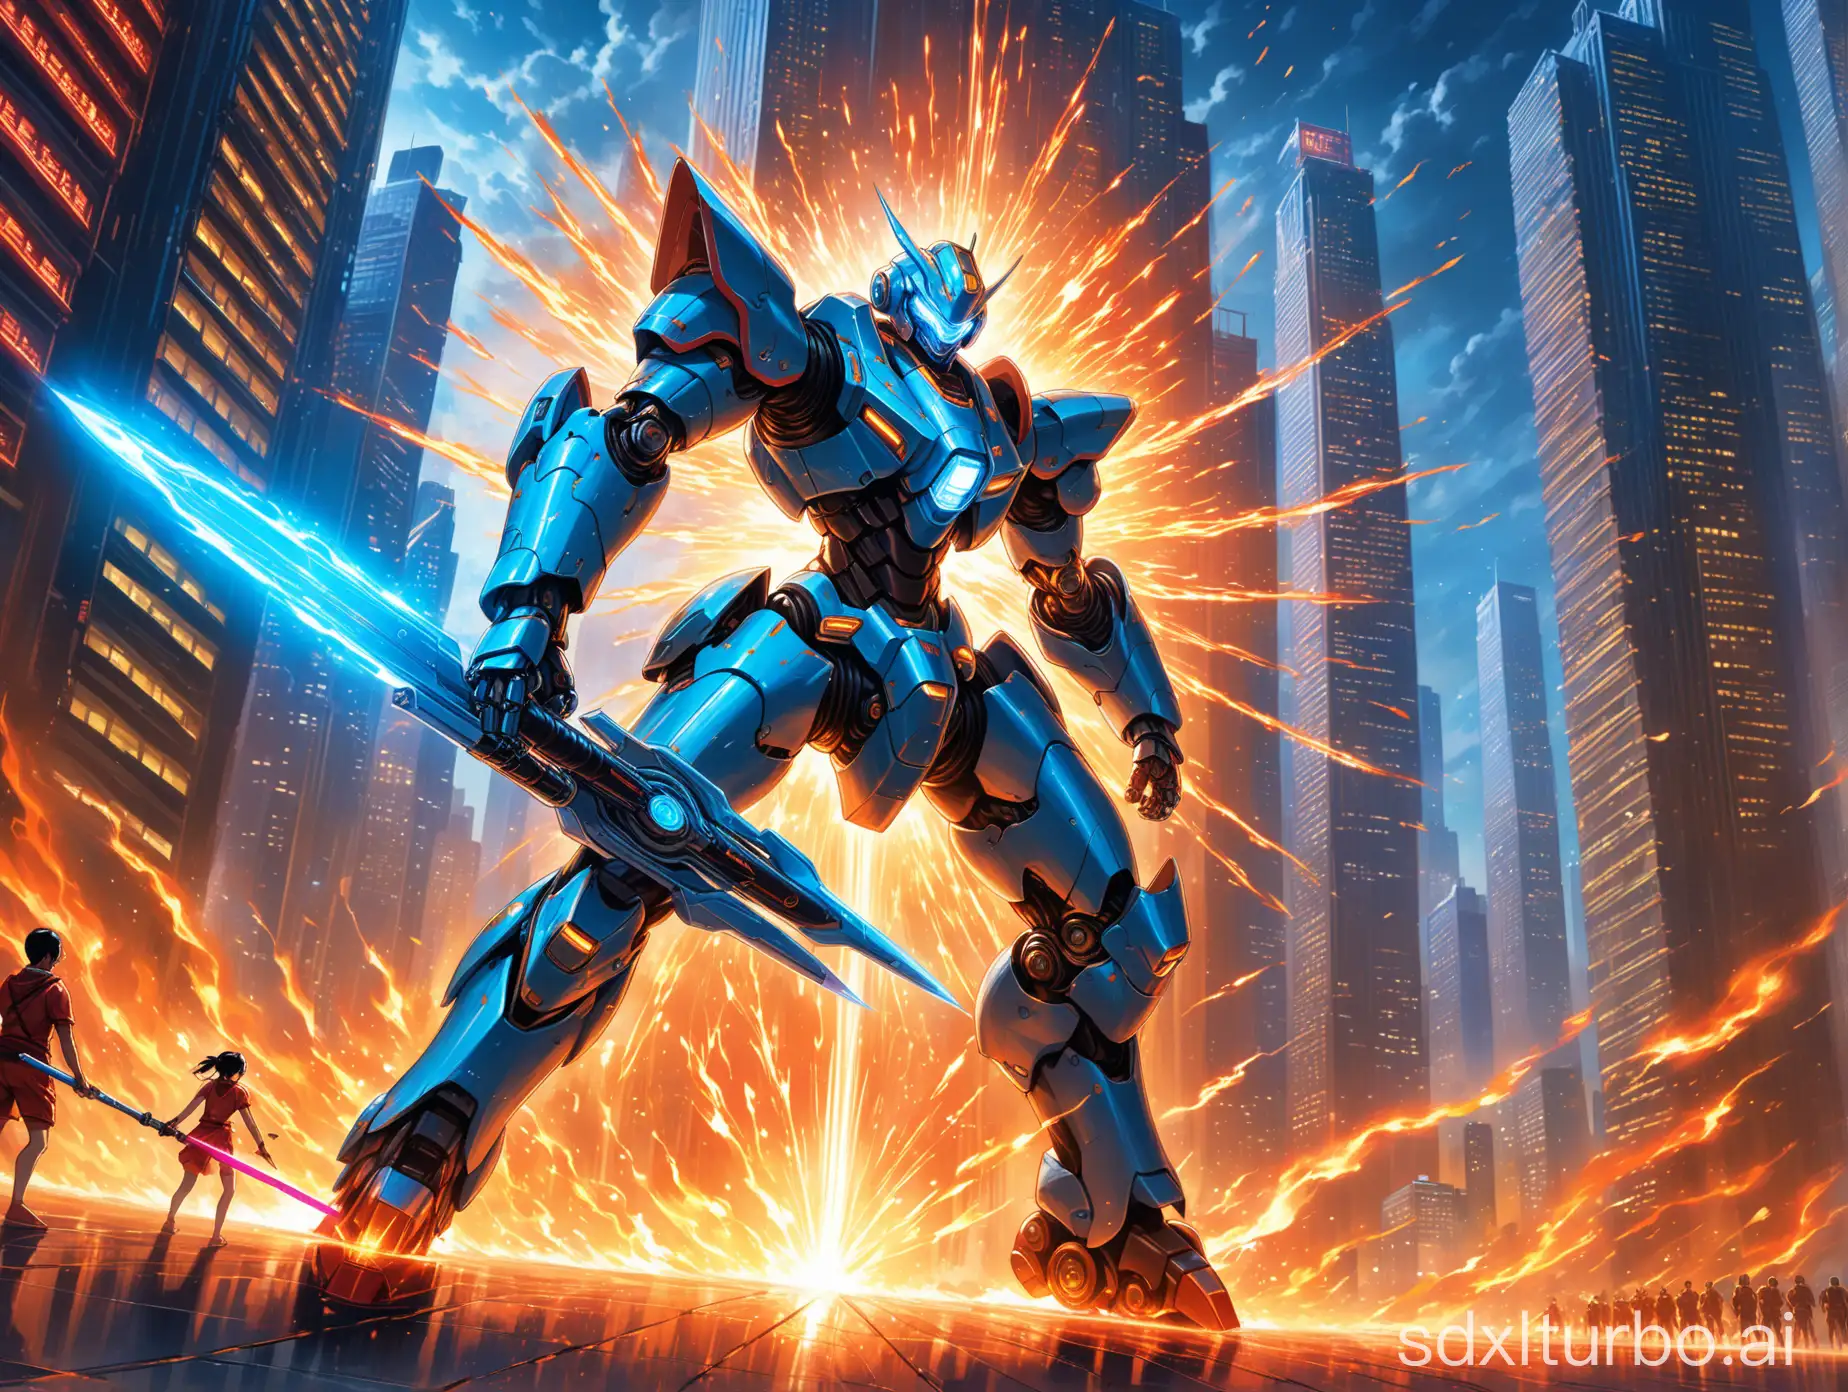 A dynamic and delicate painting that depicts a futuristic robot locked in an exhilarating battle with the traditional-armor-clad Nezha amidst the bustling night sky of a modern metropolis. The robot's silver metallic surface reflects the neon lights of the city, its arm-mounted laser sword emitting a dazzling blue glow, forming sharp beams of light. Nezha, on the other hand, stands bravely on his Wind Fire Wheels, wielding a Flame-tipped Spear enveloped in swirling fire, meeting the robot's challenge head-on. The clash between the two generates an explosive visual effect, with sparks flying and illuminating the towering skyscrapers and the crowd of onlookers below, filling the entire scene with a tense and intense atmosphere.